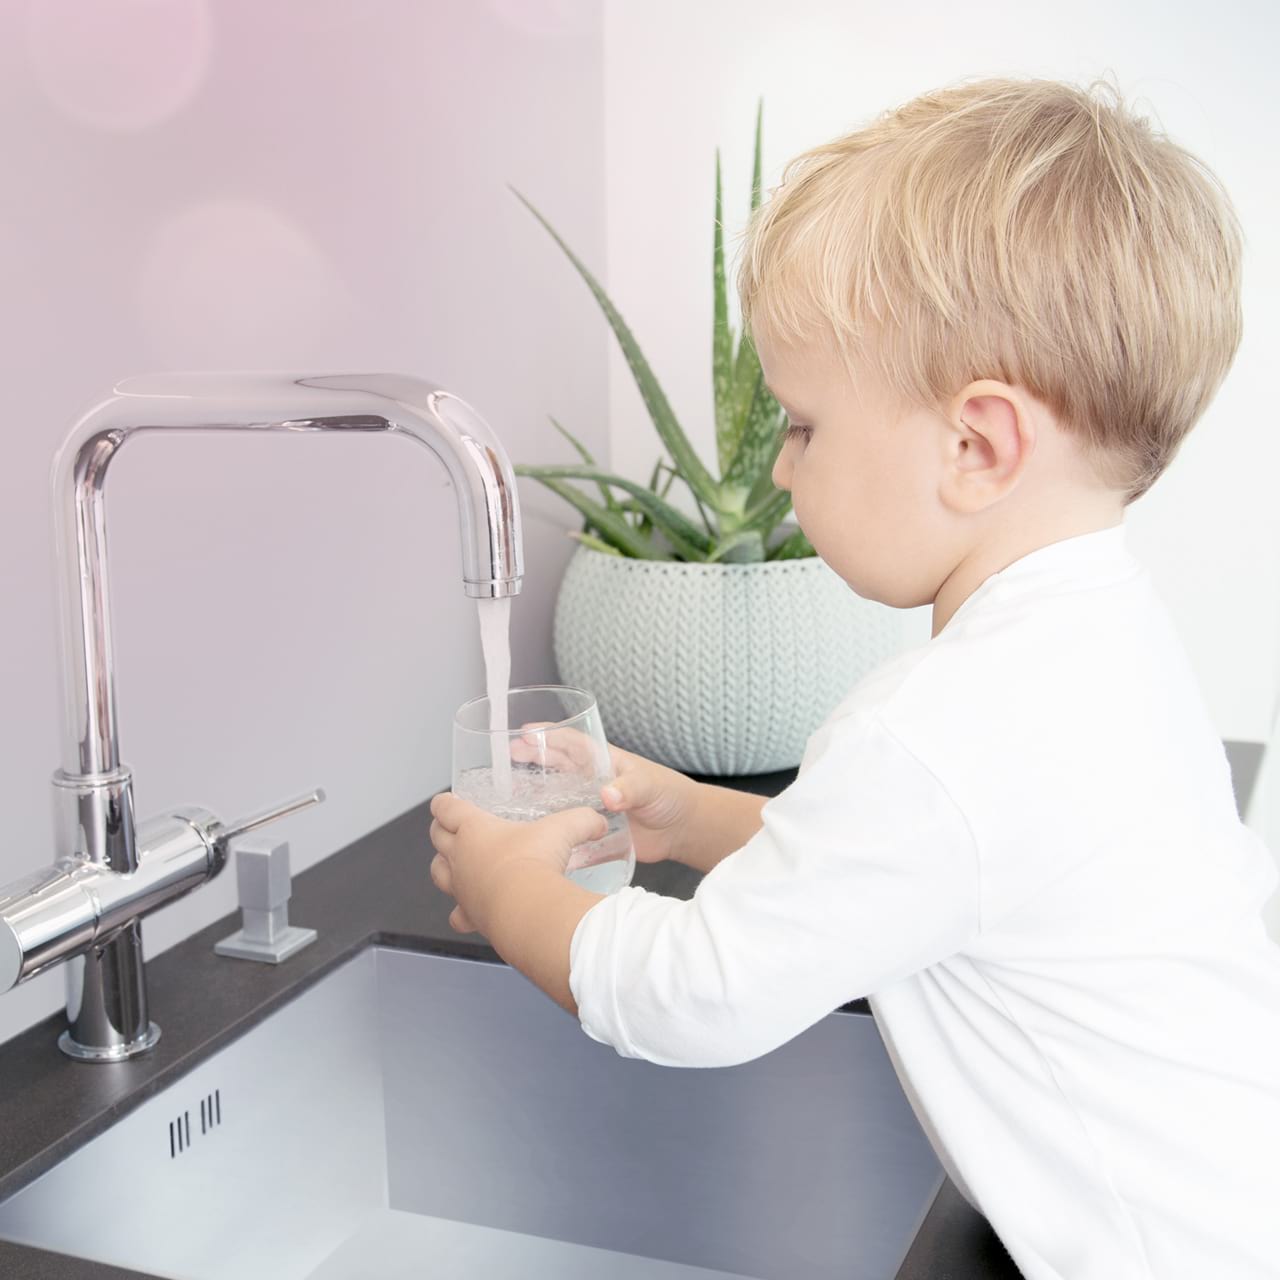 https://www.bwt.com/de-at/-/media/bwt/at/images/private-homes/water-at-home/trinkwasserfilter-wasserhygiene_1280x1280.jpg?h=1280&w=1280&rev=cd6bb3a27ae1483c91cf43f5a57c0aa4&hash=3CE04BED0AABC6408B862CB2A5405FF6